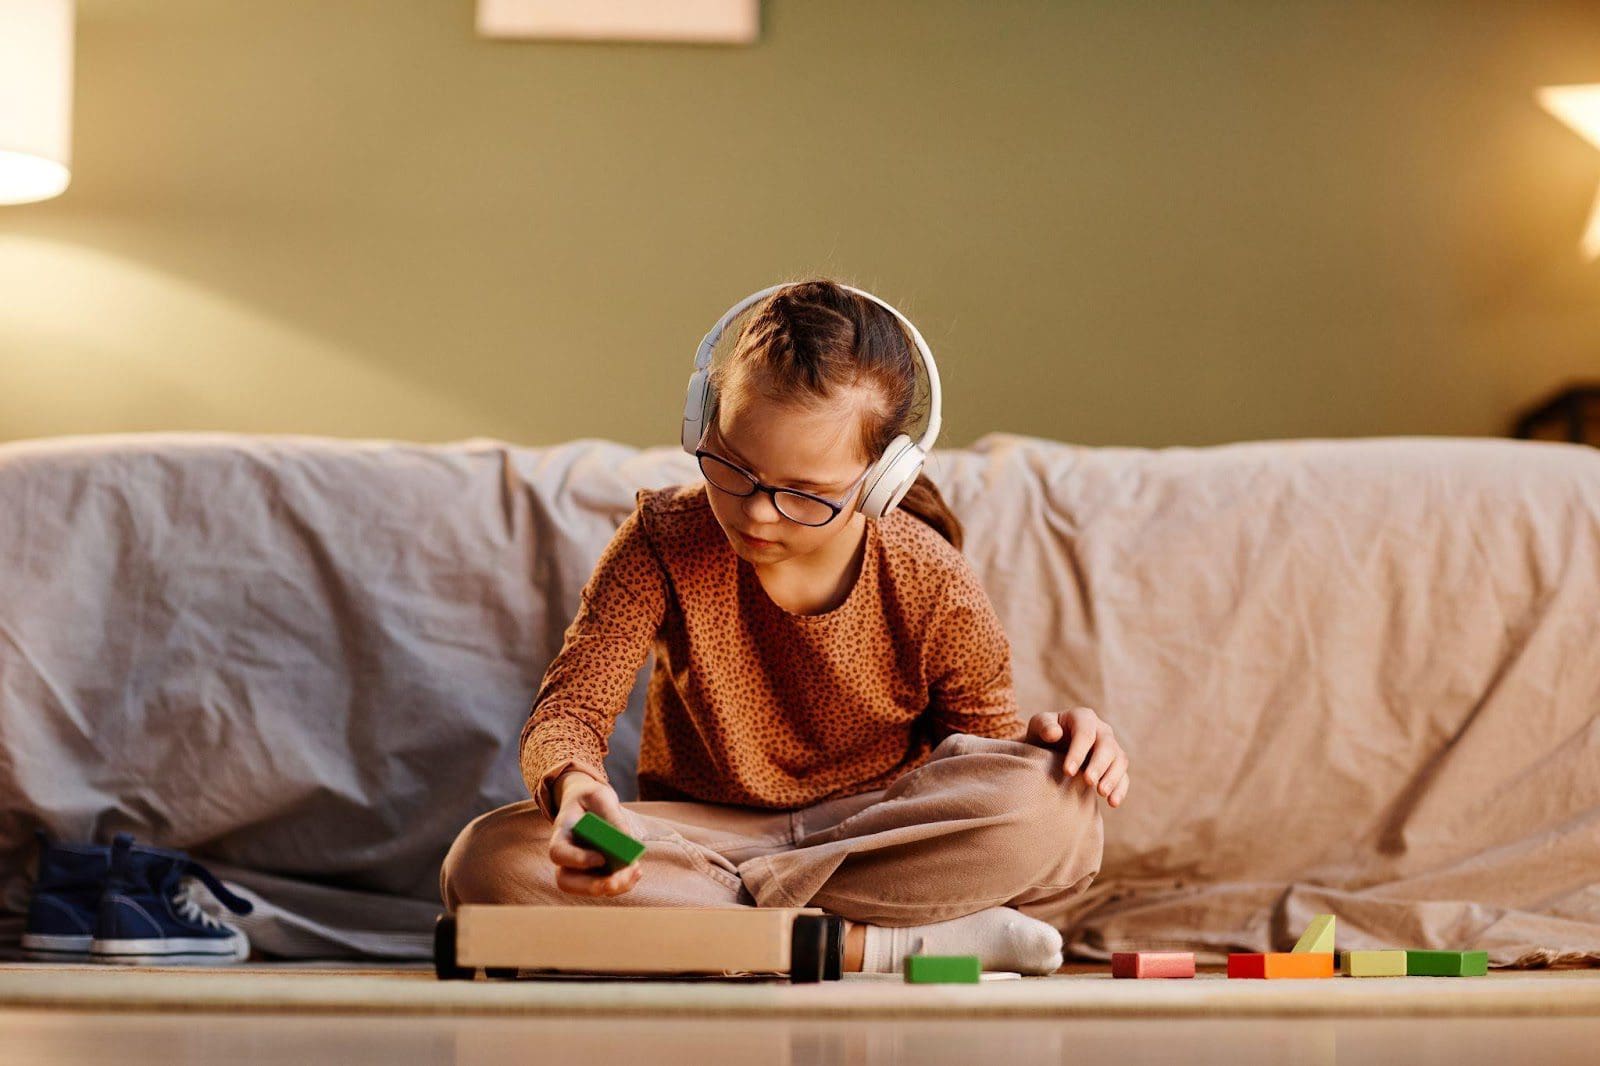 Young girl playing with blocks at home and wearing noise-canceling headphones.